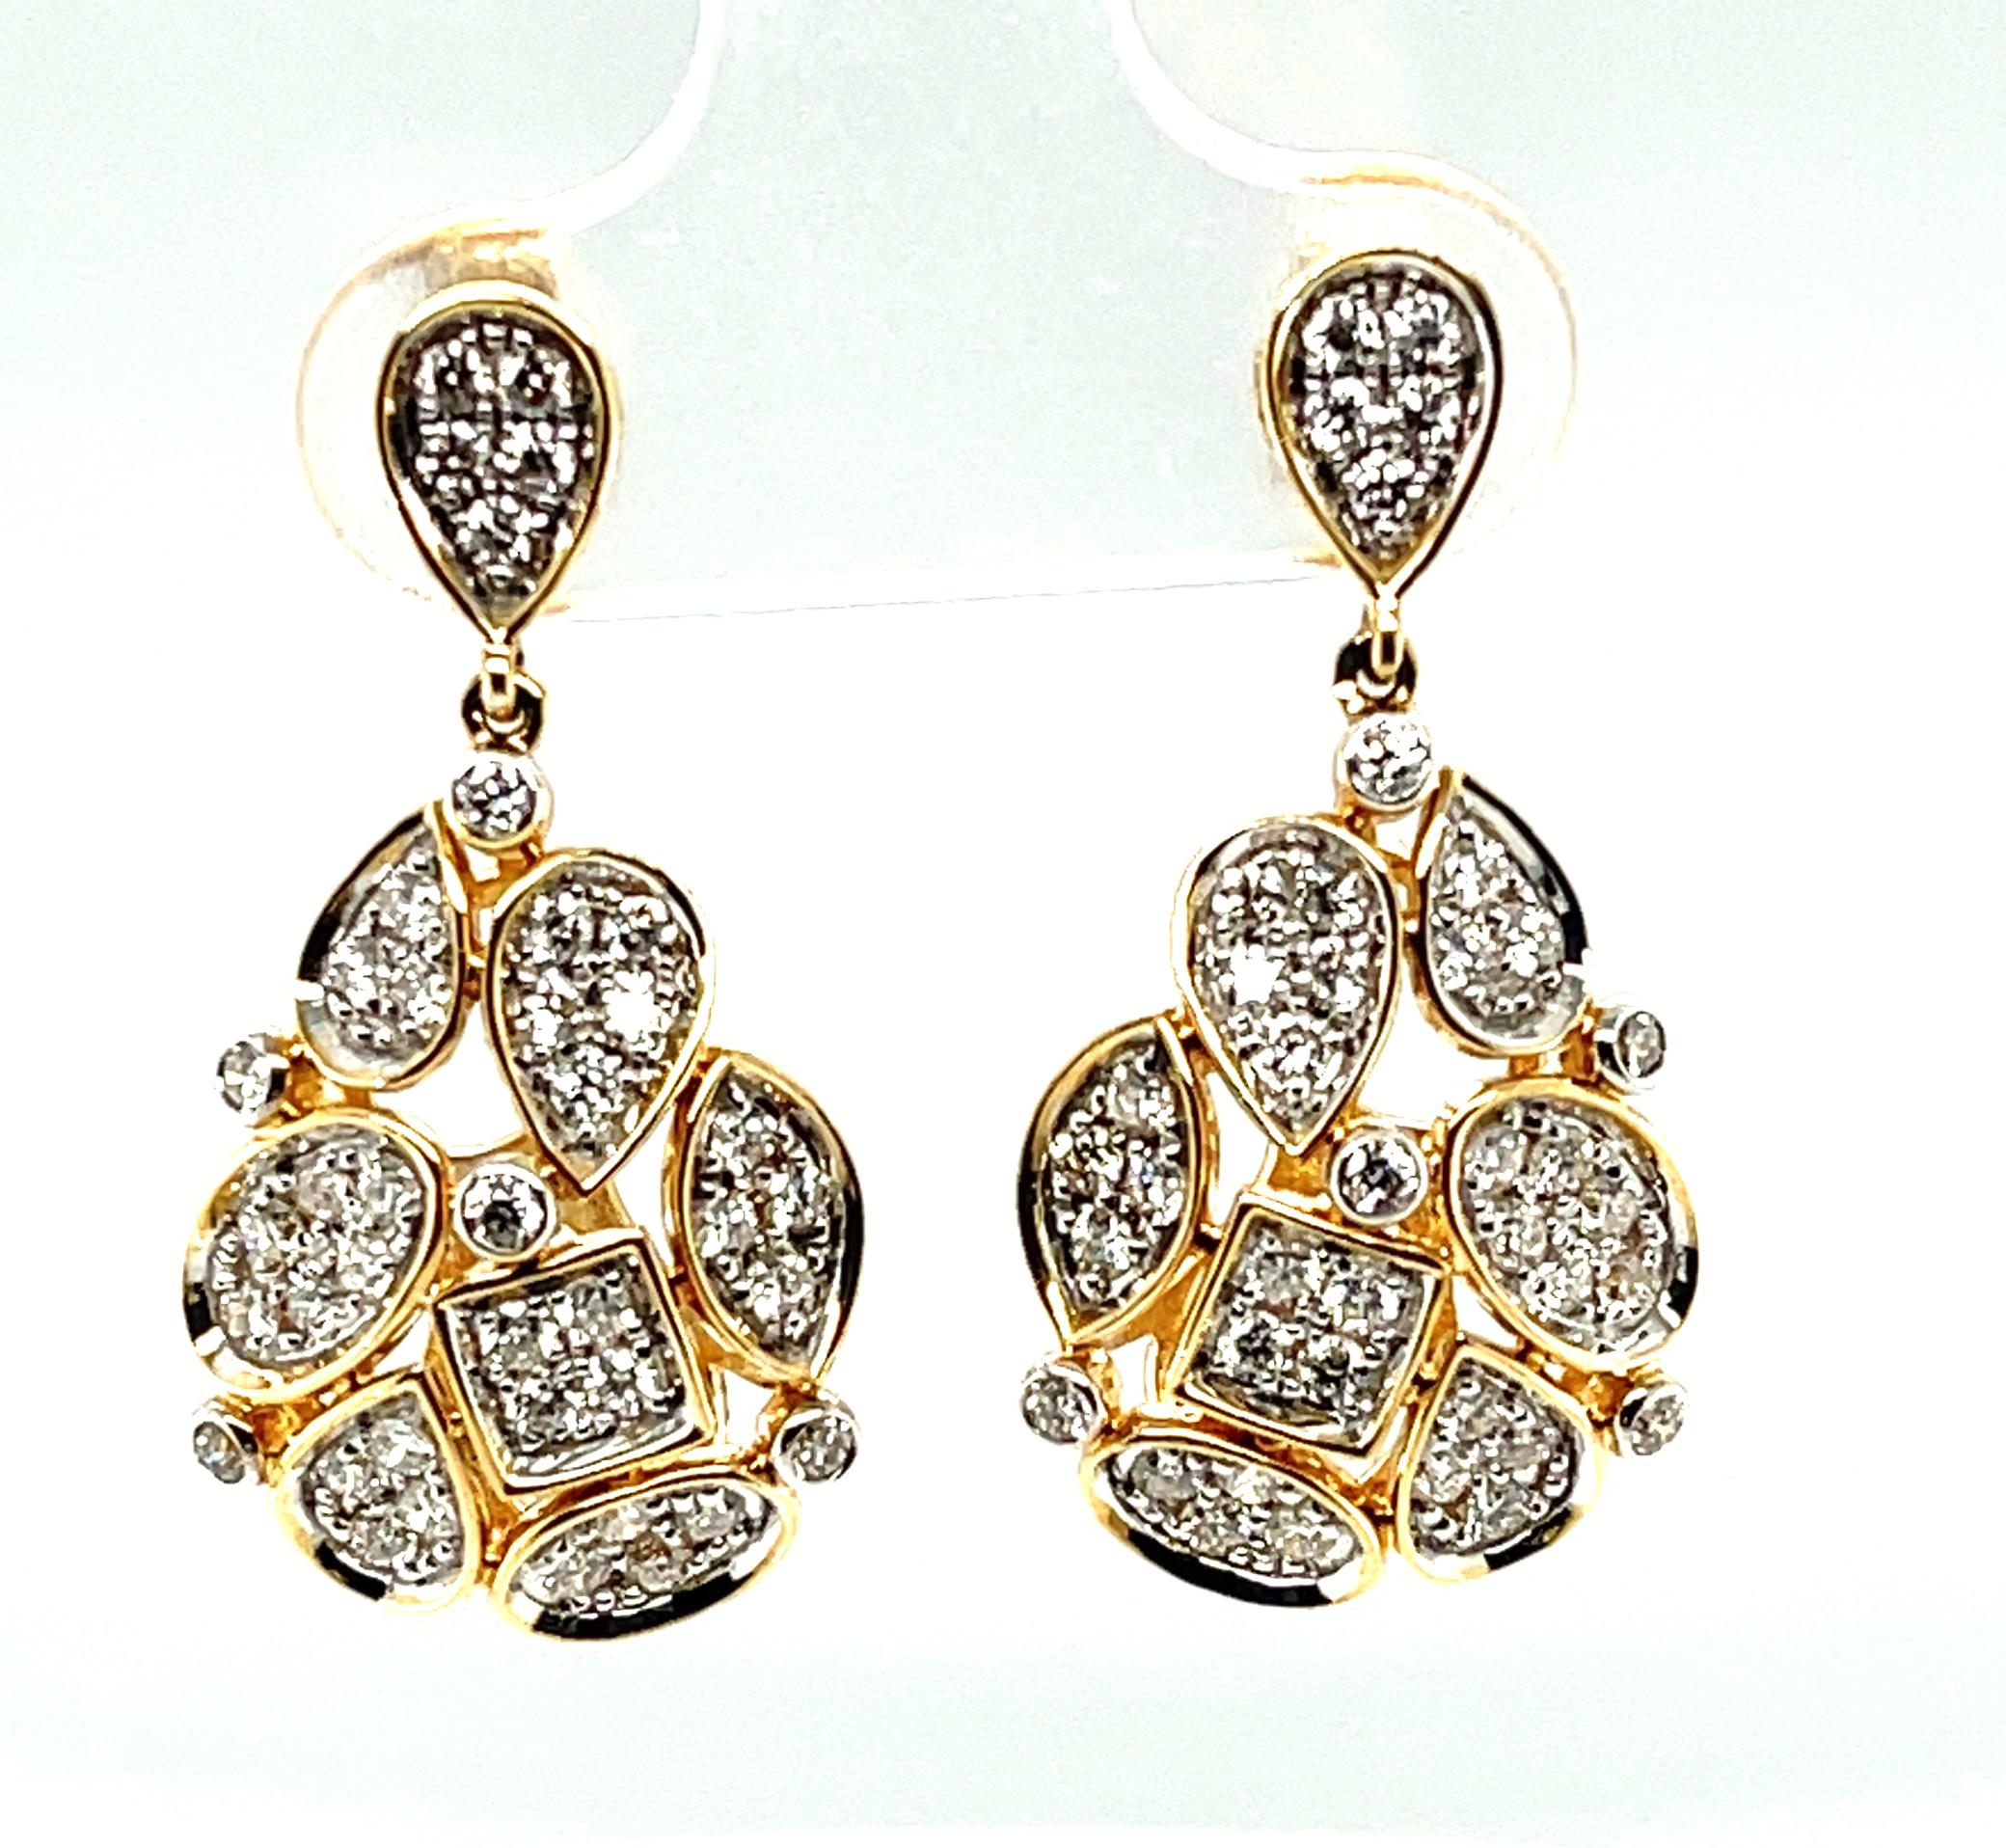 These lovely 14k yellow gold drop earrings feature over a carat of round, brilliant cut white diamonds pave set in an assortment of fun shapes and artfully arranged in a unique mosaic pattern!  This playful, yet elegant design is very versatile as